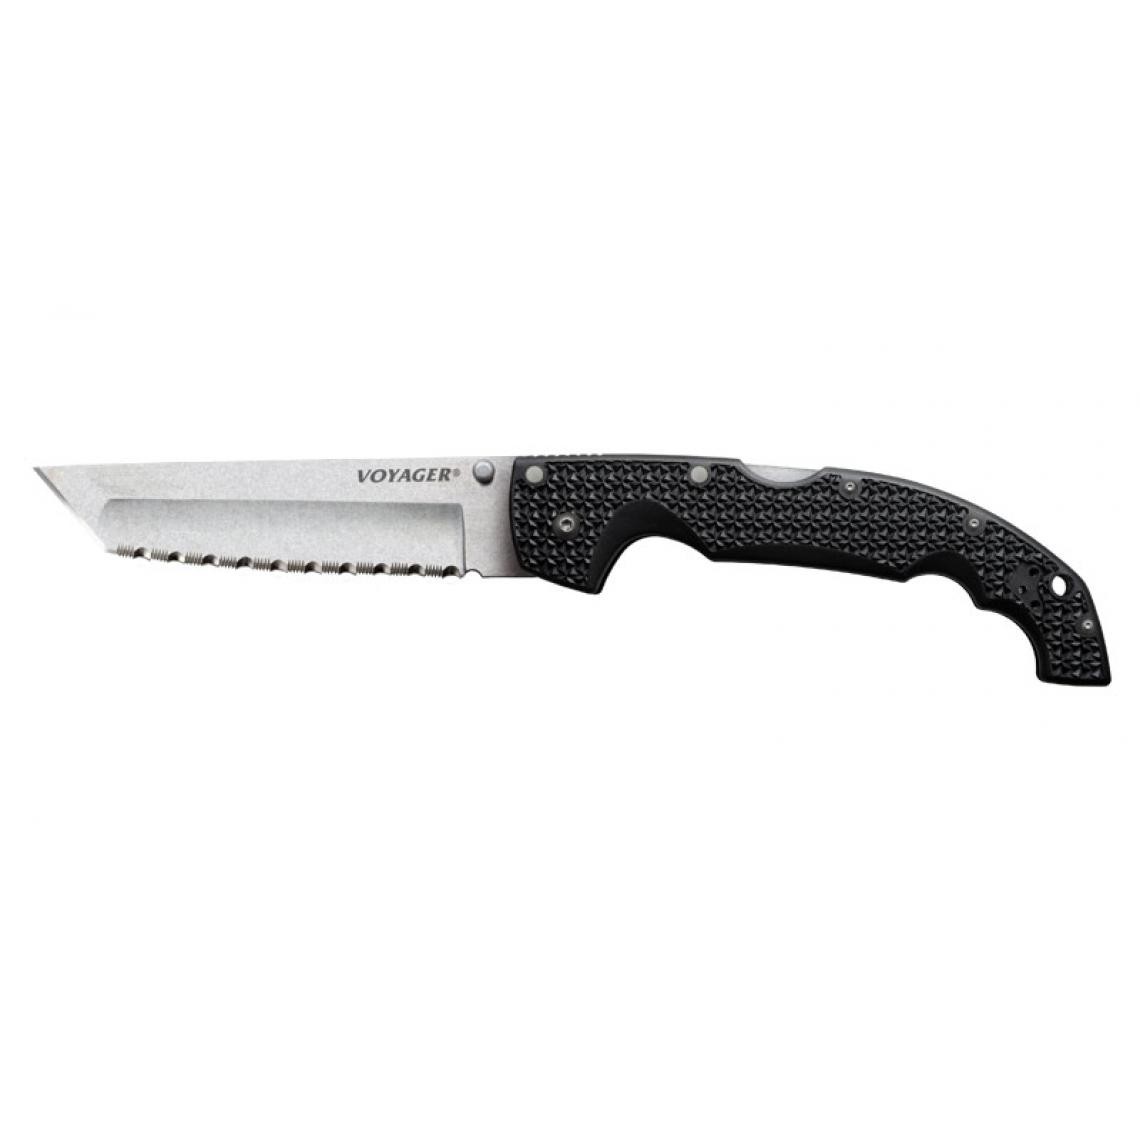 Divers Marques - COLD STEEL - CS29AXTS - XL VOYAGER TANTO - Outils de coupe